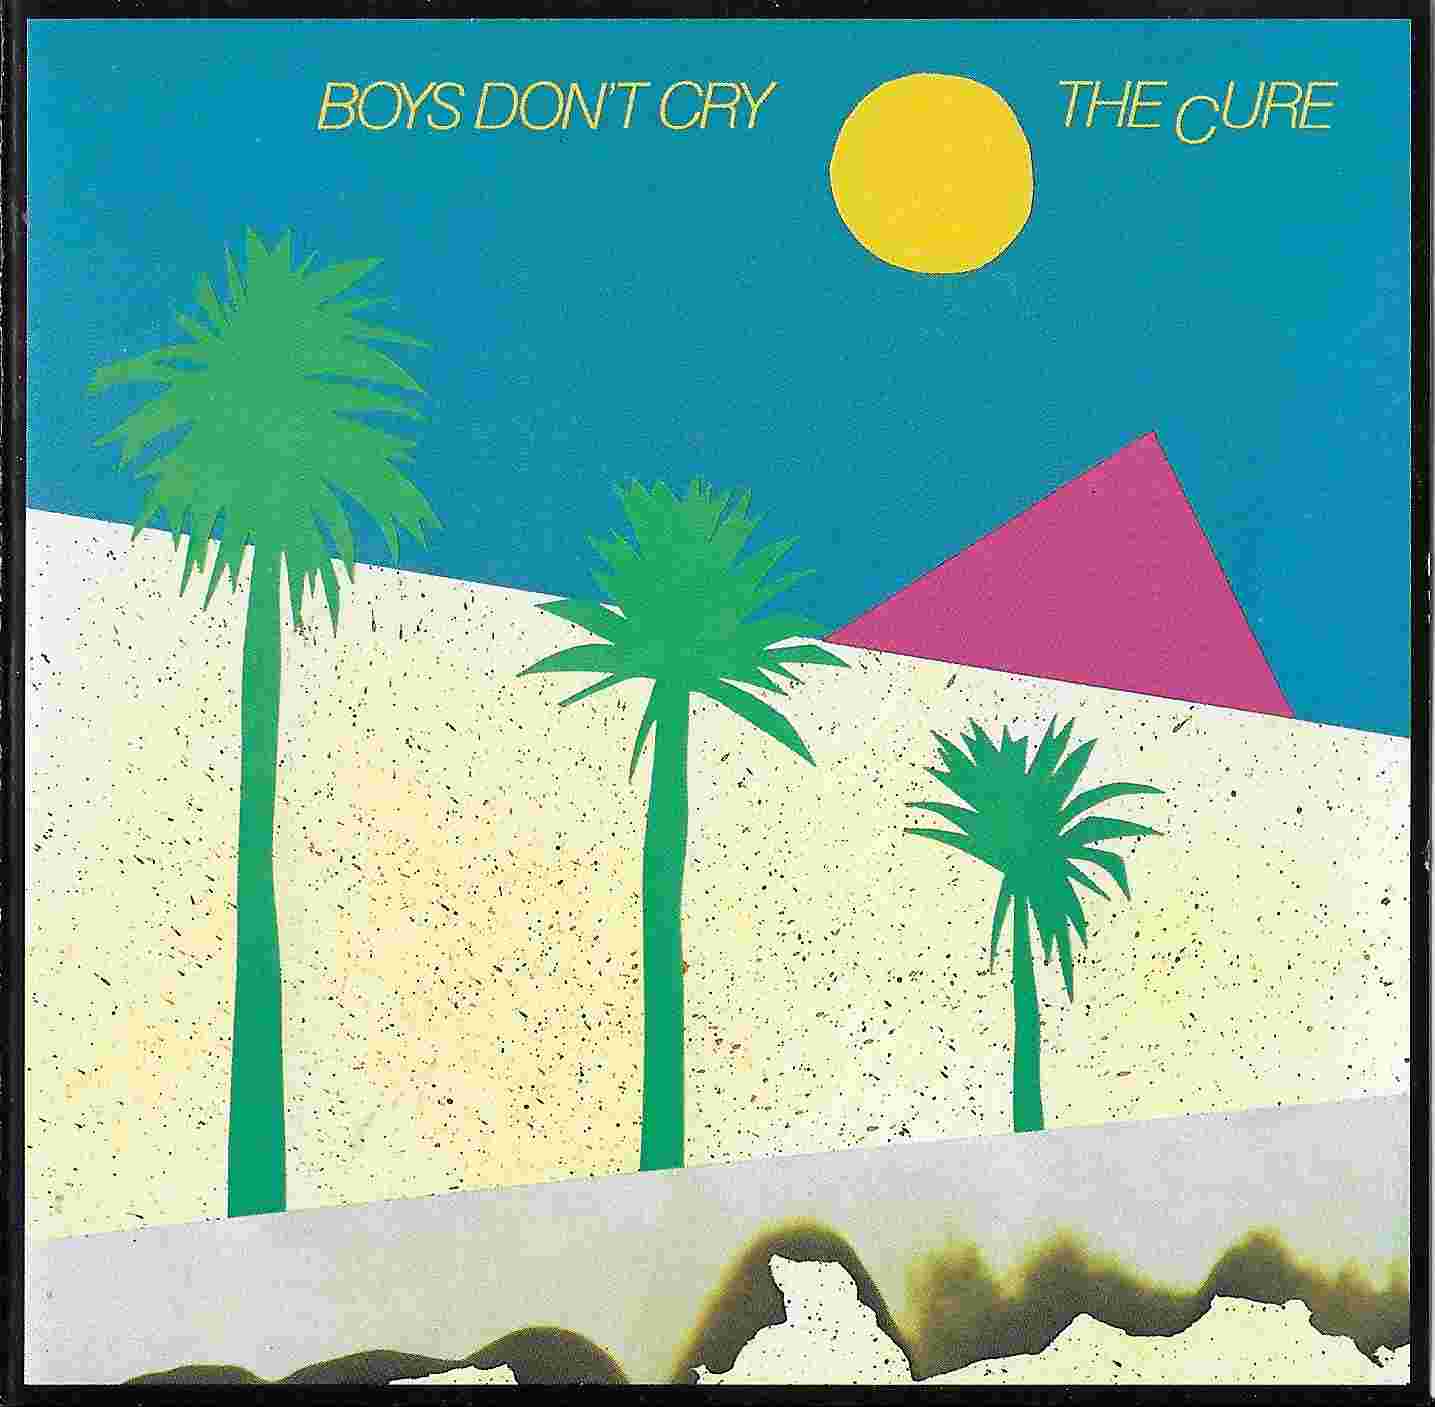 Picture of 815011 - 2 Boys don't cry by artist The Cure 